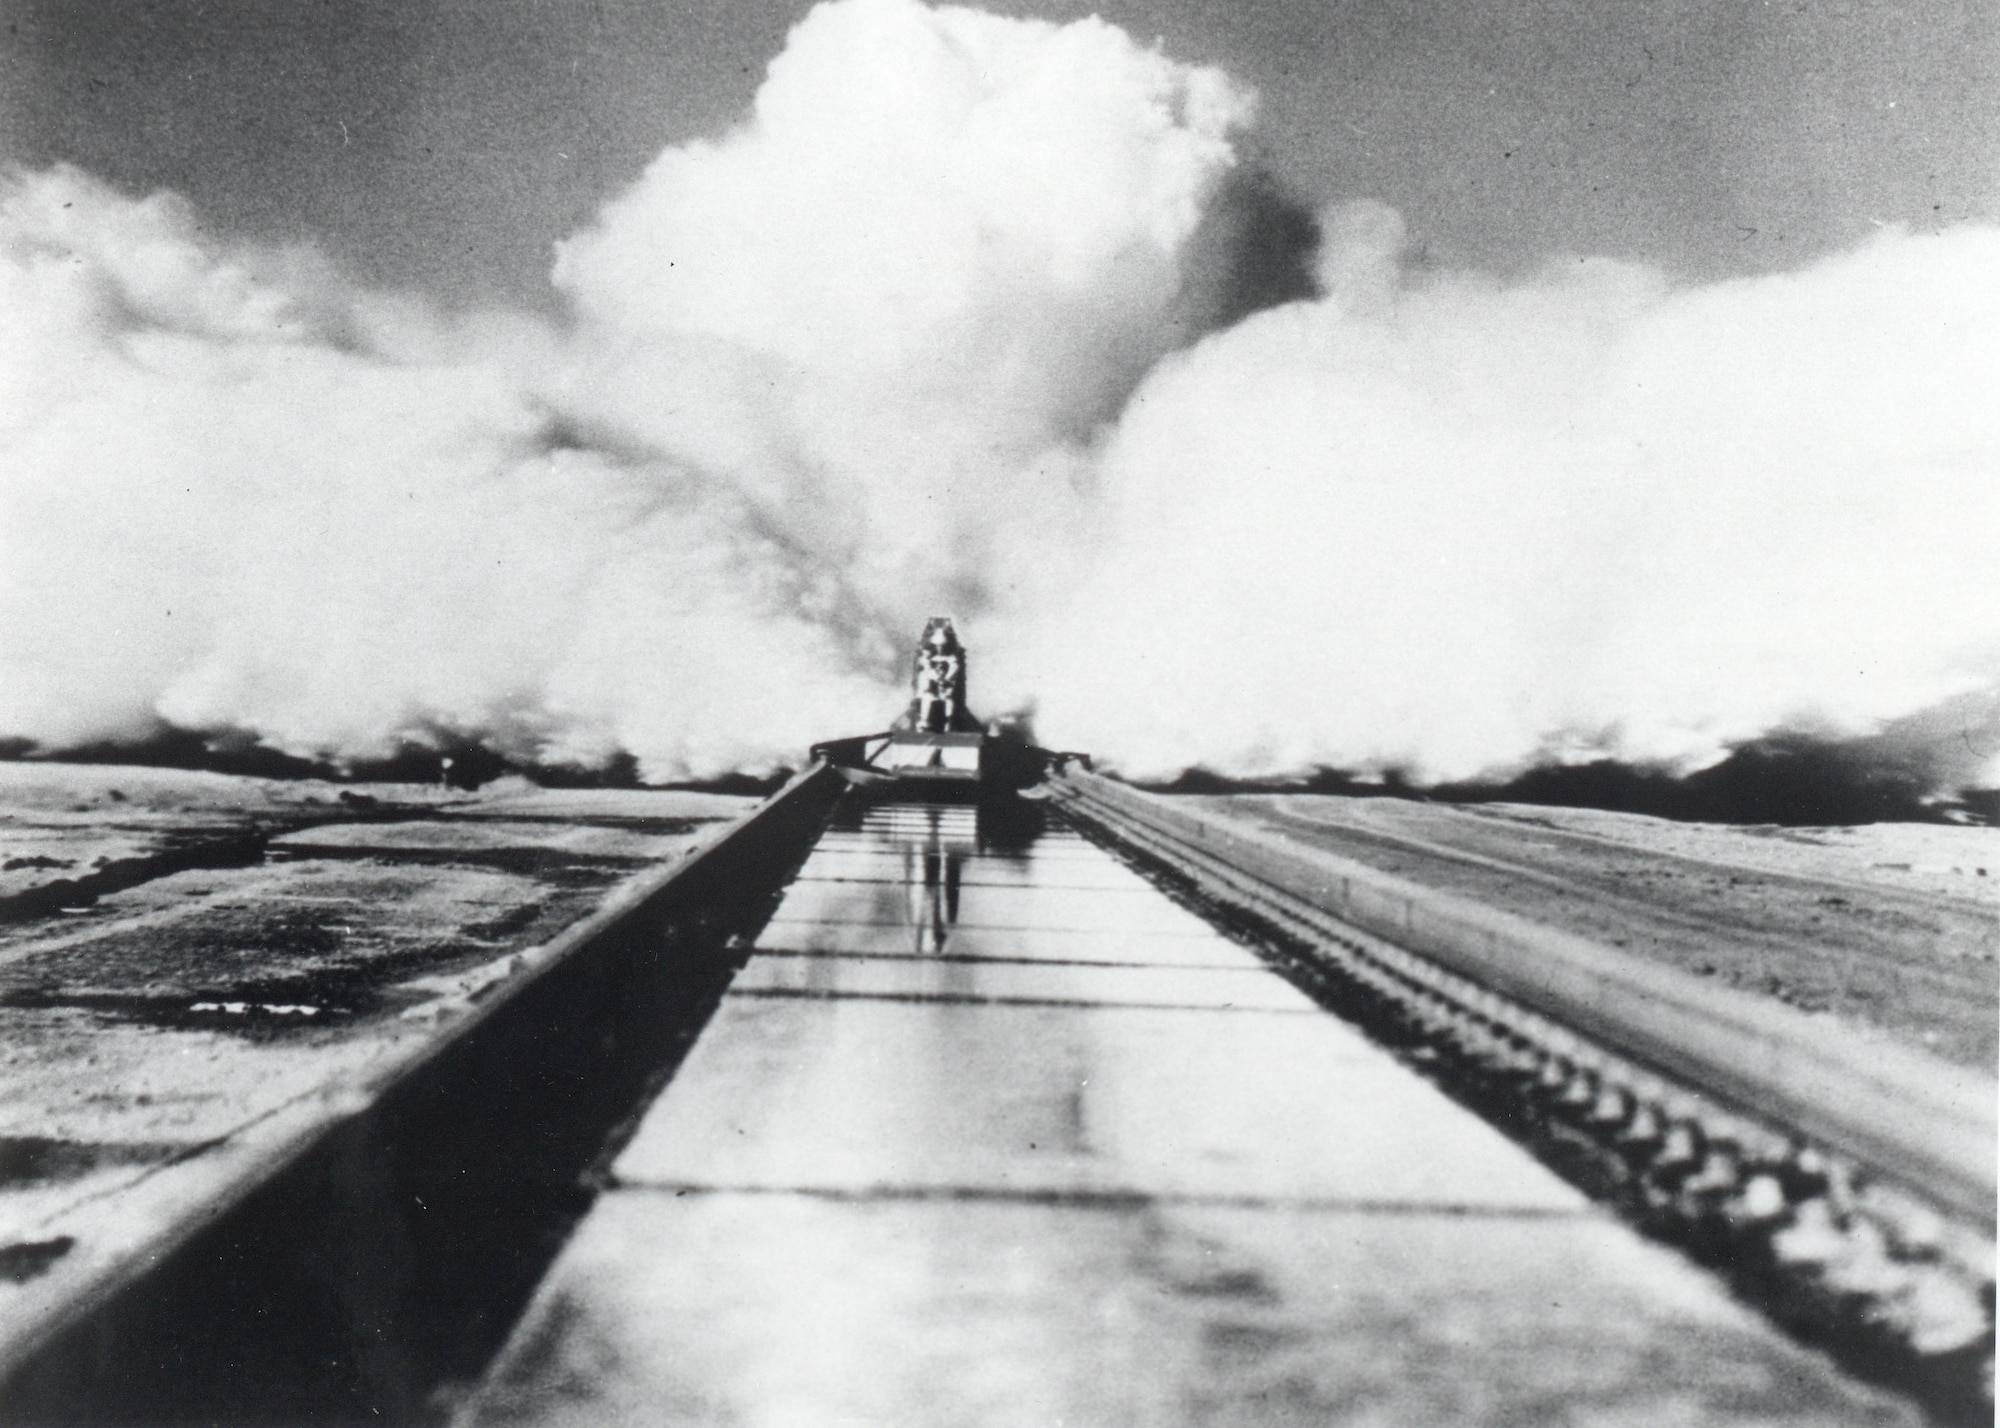 On December 10, 1954, Col. John P. Stapp propelled down the Holloman High Speed Test Track aboard the Sonic Wind Rocket Sled 1 at a rate of 632 miles per hour, earning the title "The Fastest Man on Earth." Stapp’s experiment was the last human test at the HHSTT. His findings proved a pilot flying at 35,000 feet, going twice the speed of sound, could withstand the wind blast if he or she had to eject. (Courtesy Photo)